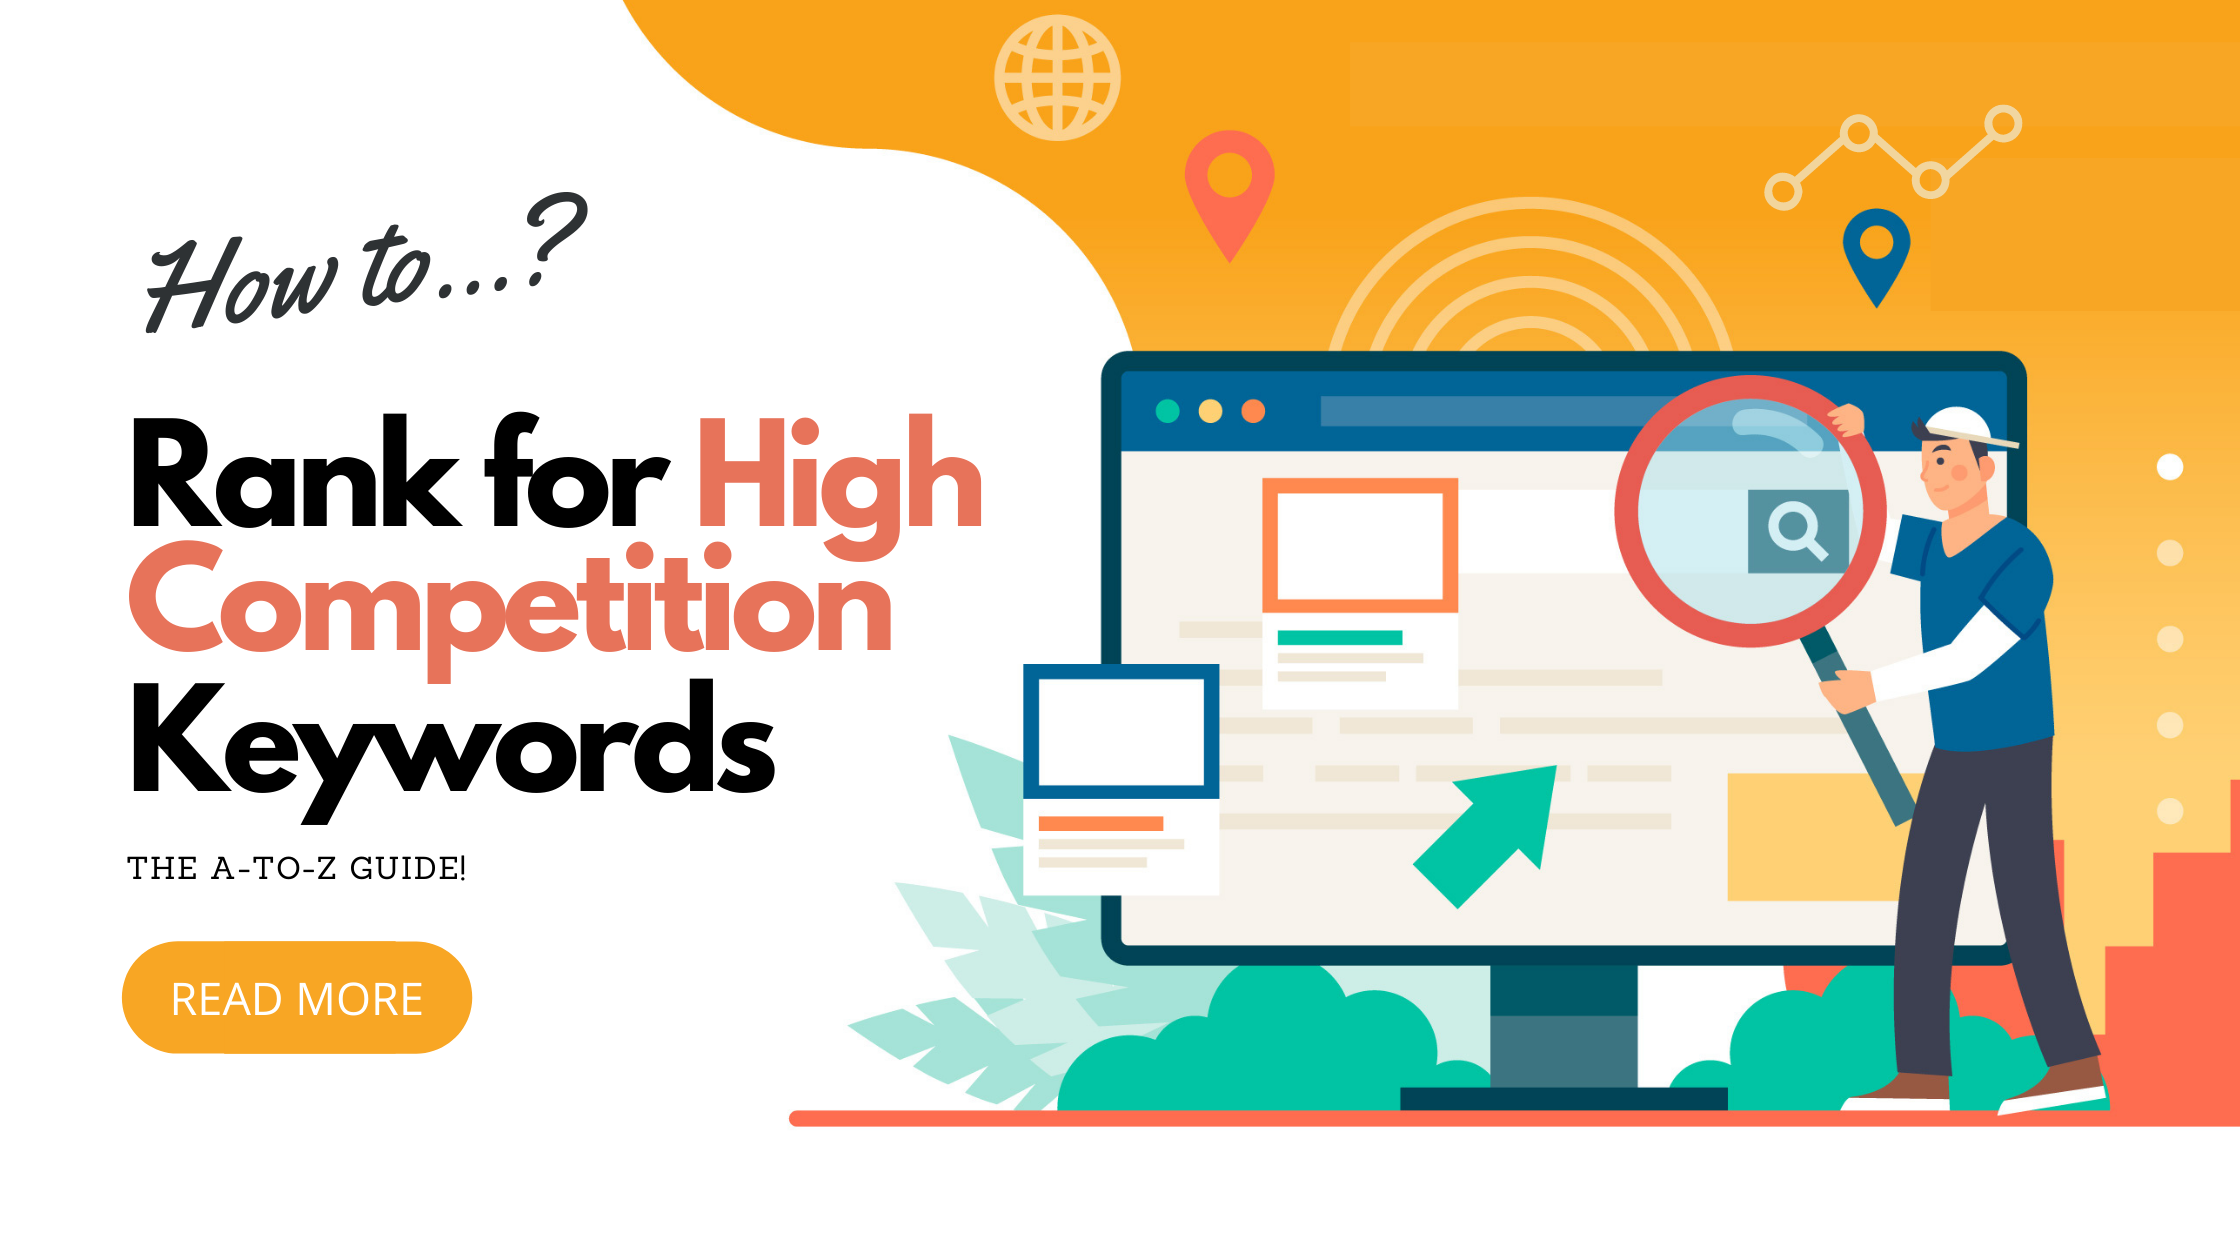 How to Rank for High Competition Keywords: The A-to-Z Guide!